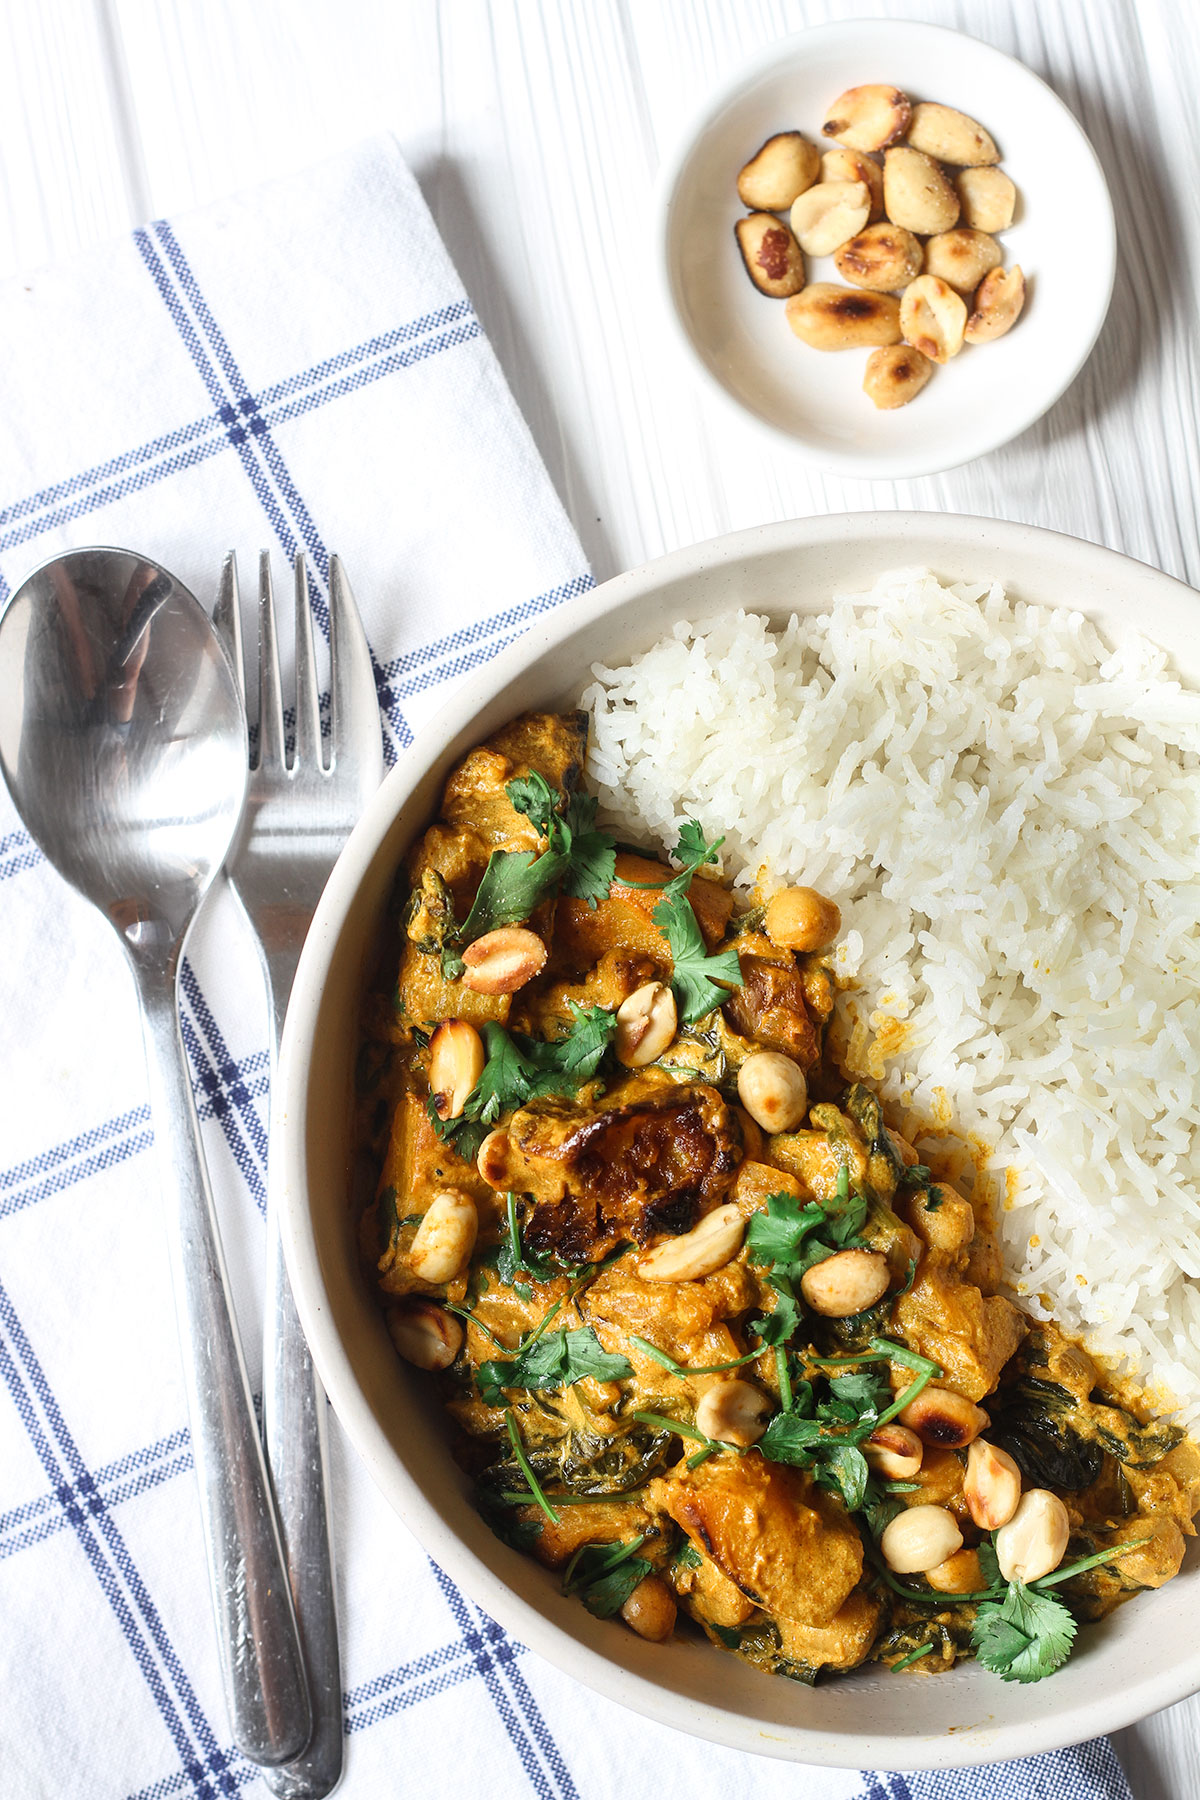 A serving of Roasted Butternut Squash & Chickpea Curry